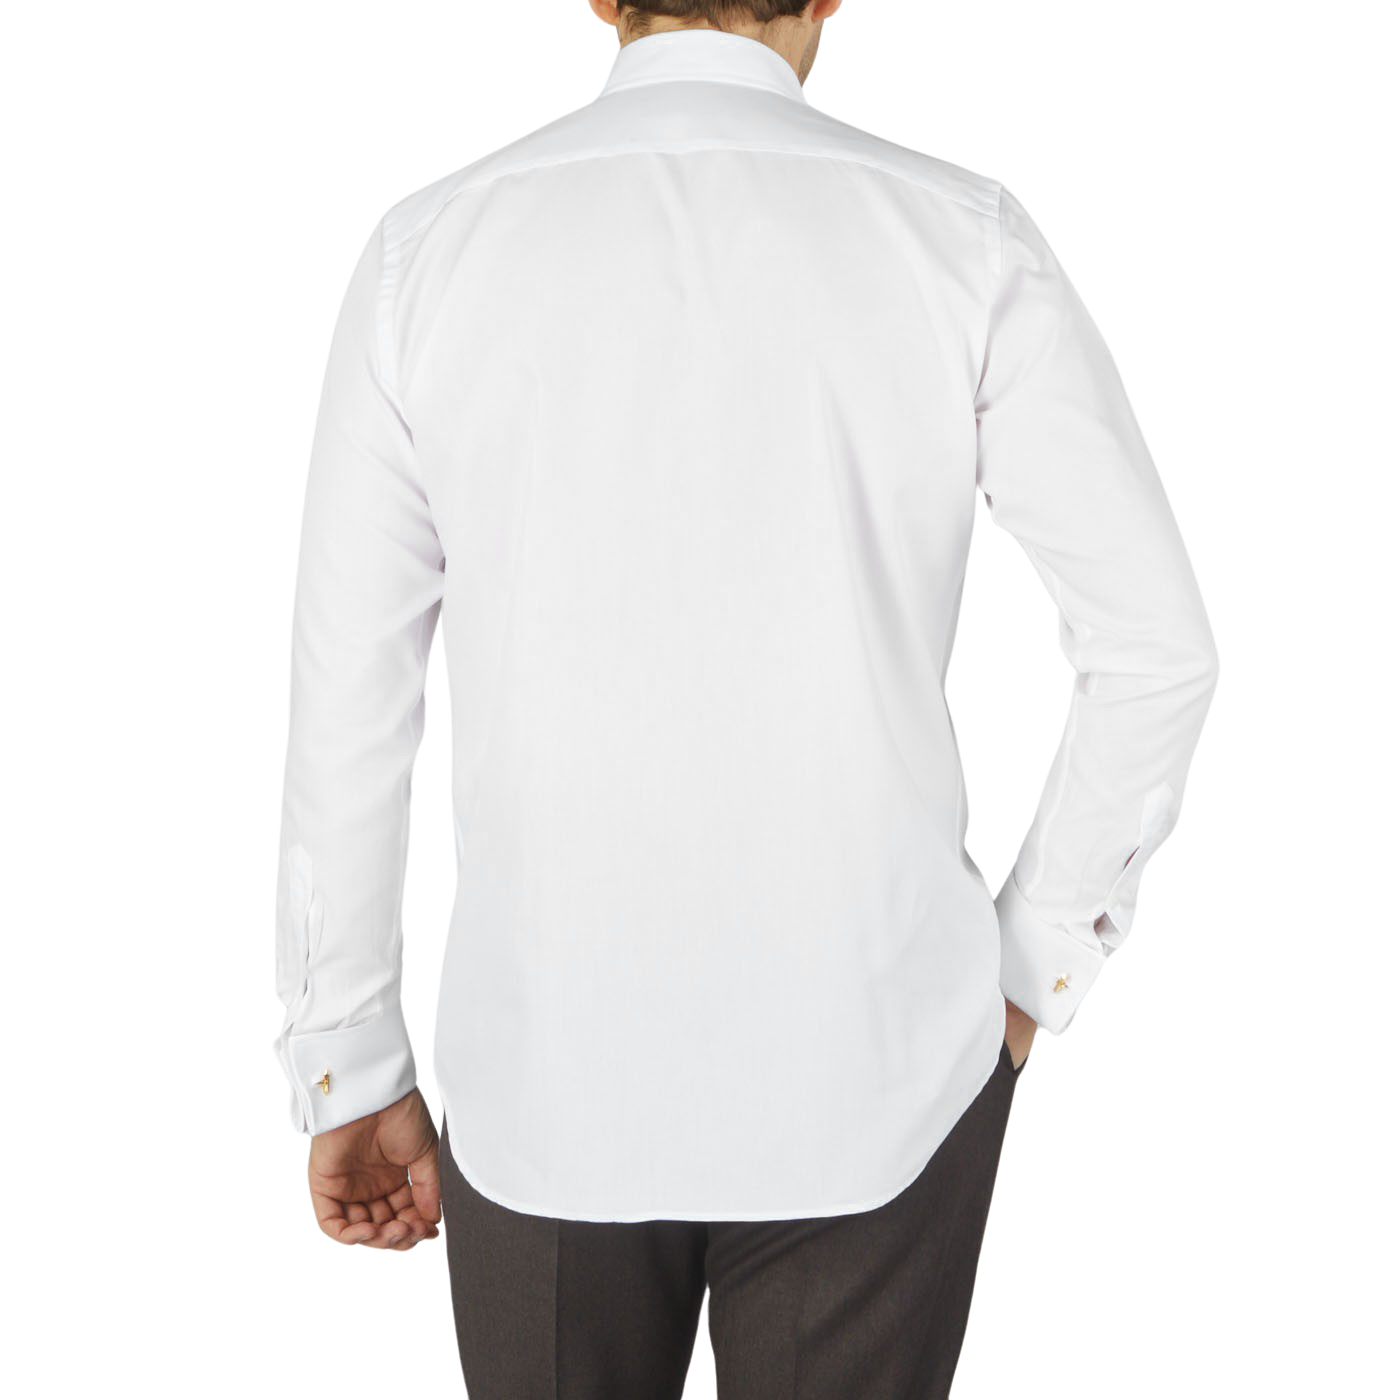 The back view of a man wearing a Canali White Cotton Double Cuff Plain Dress Shirt.